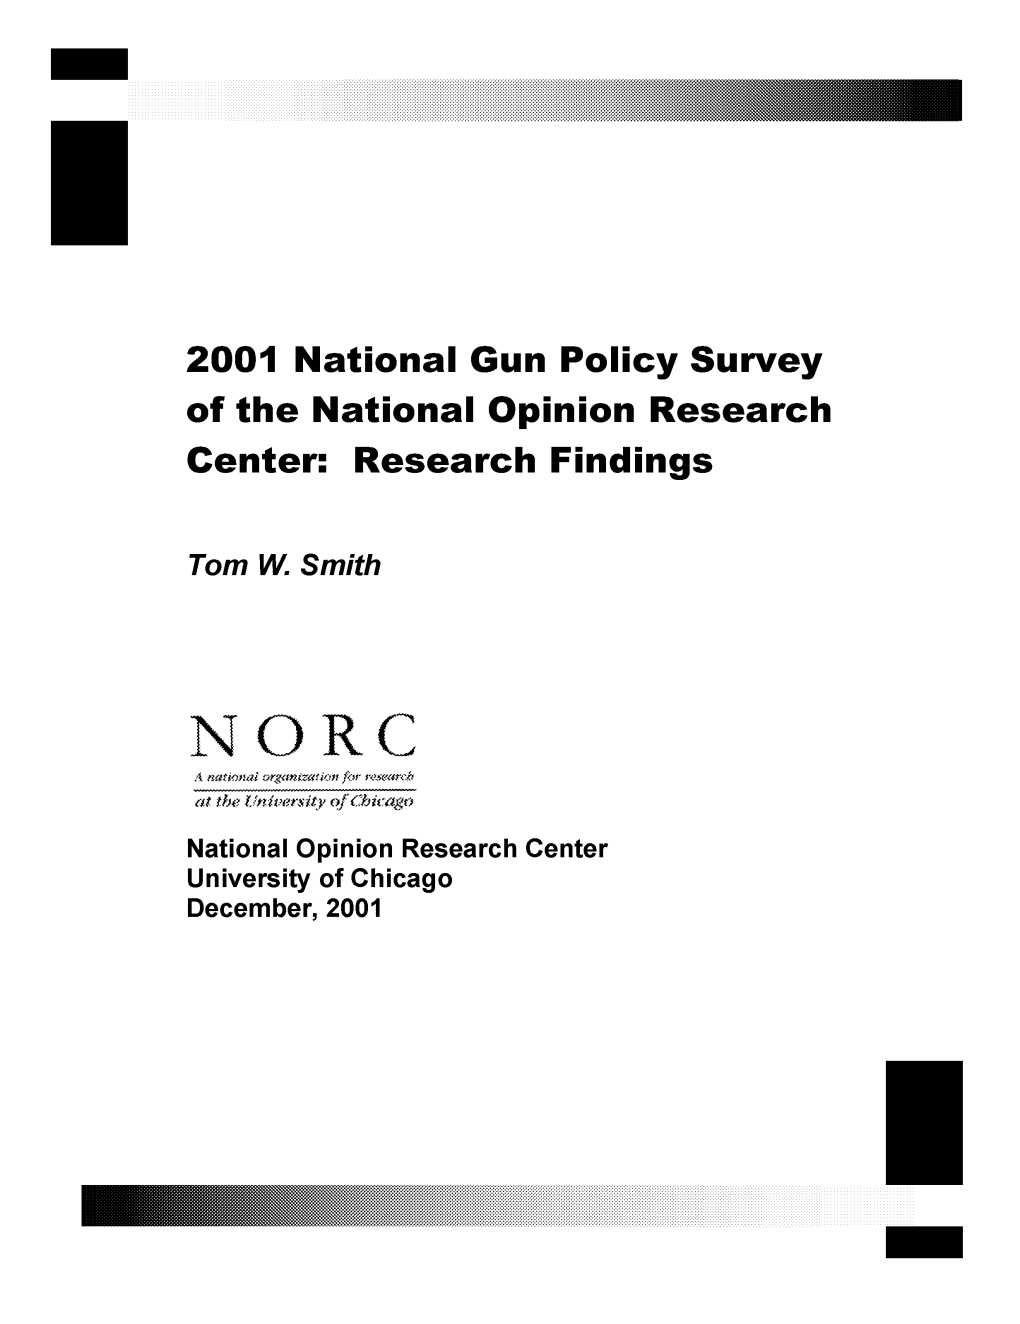 2001 National Gun Policy Survey of the National Opinion Research Center: Research Findings